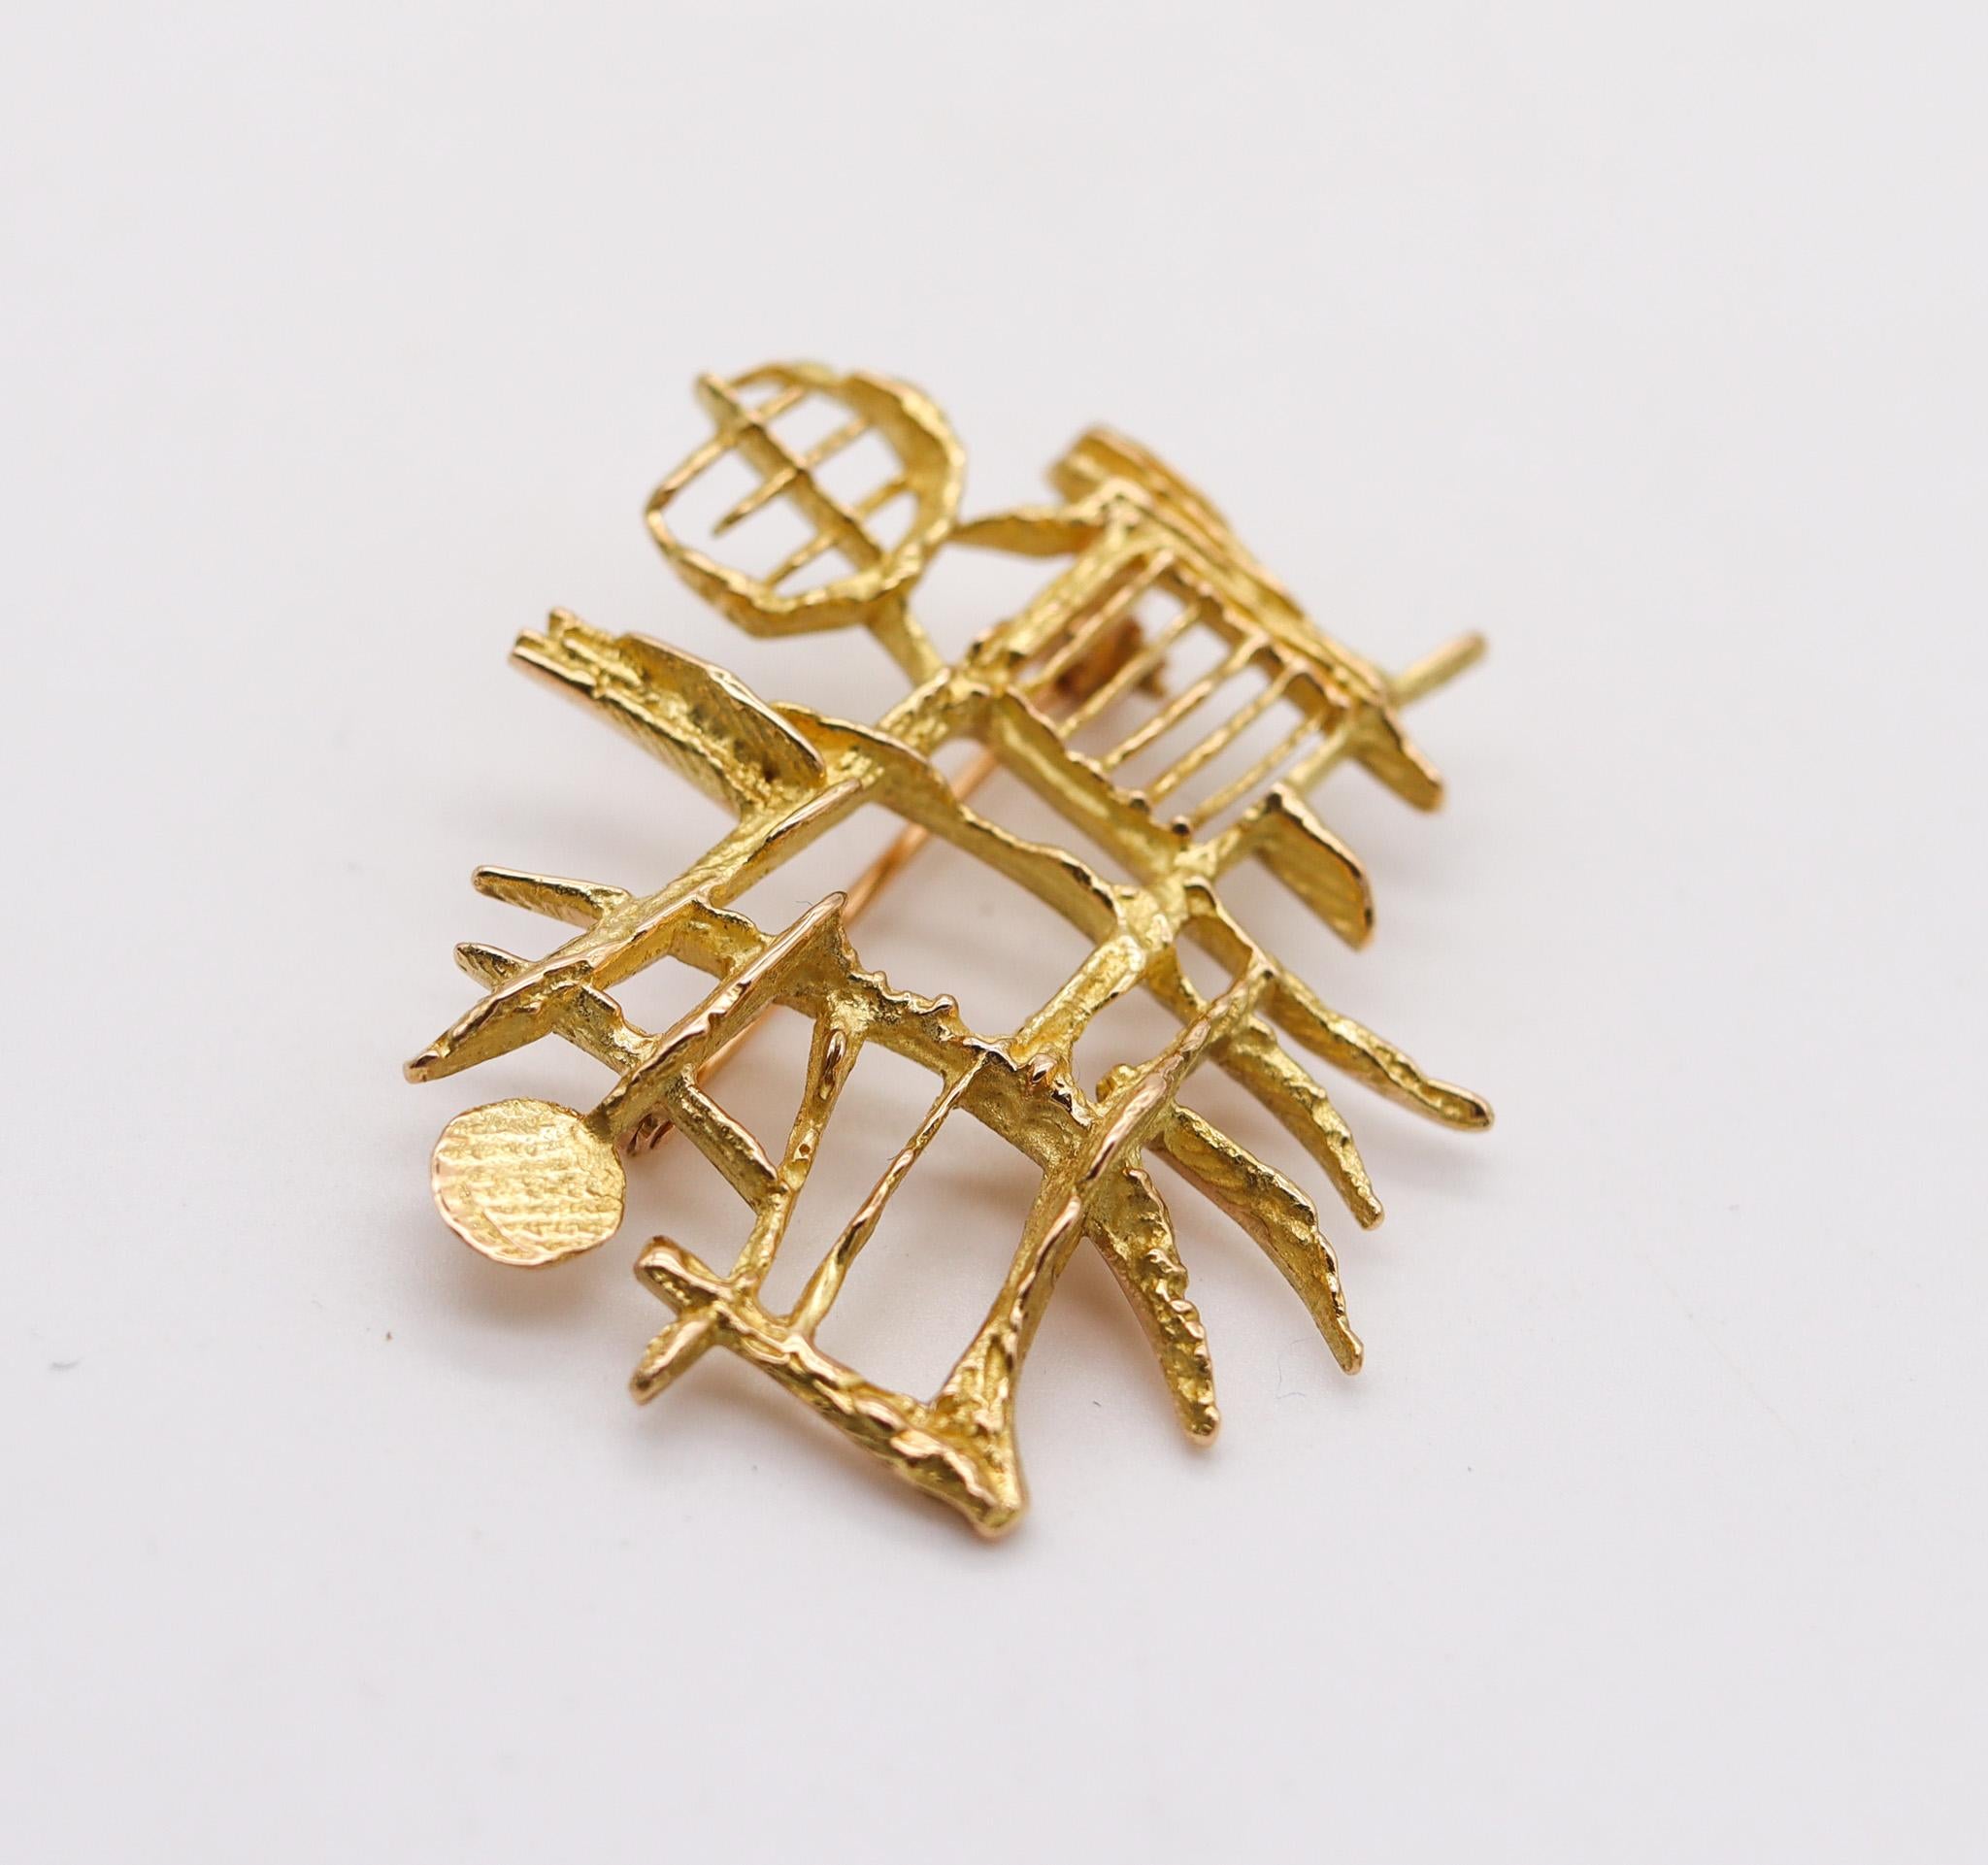 Women's or Men's Giò Pomodoro 1956 Milano Sculptural Figurative Art Brooch in 18k Yellow Gold For Sale